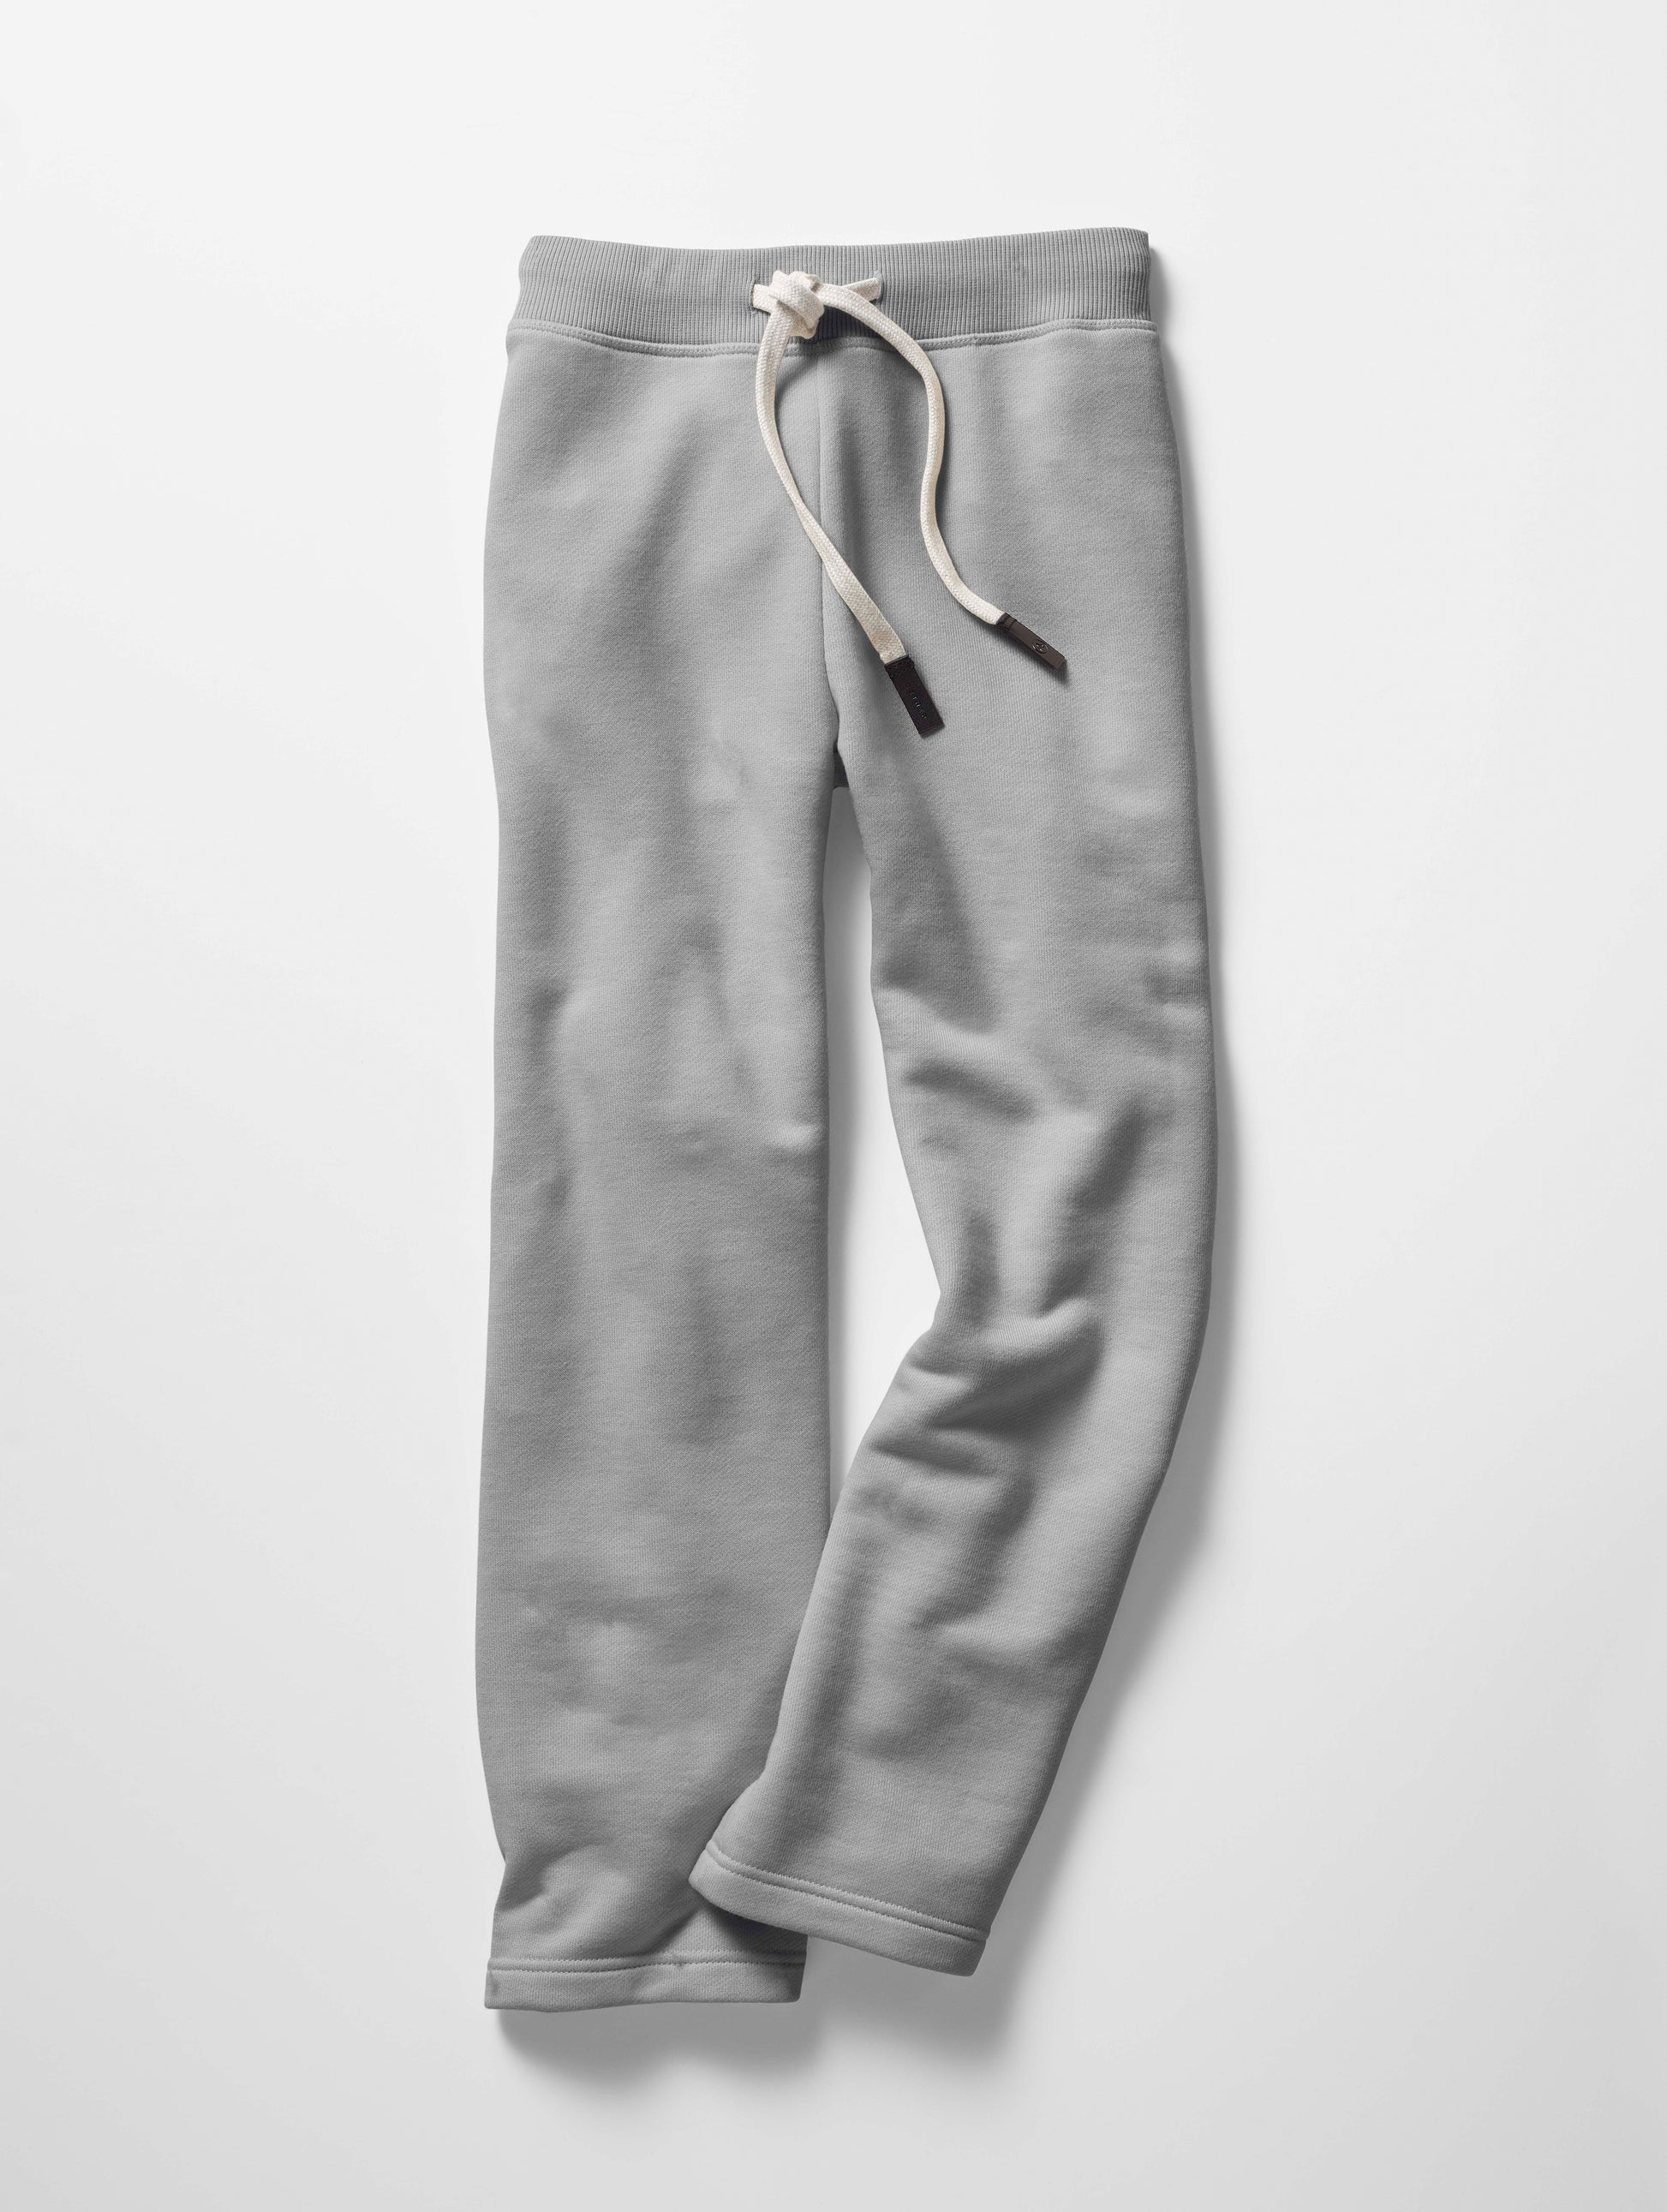 grey cropped sweatpants for women